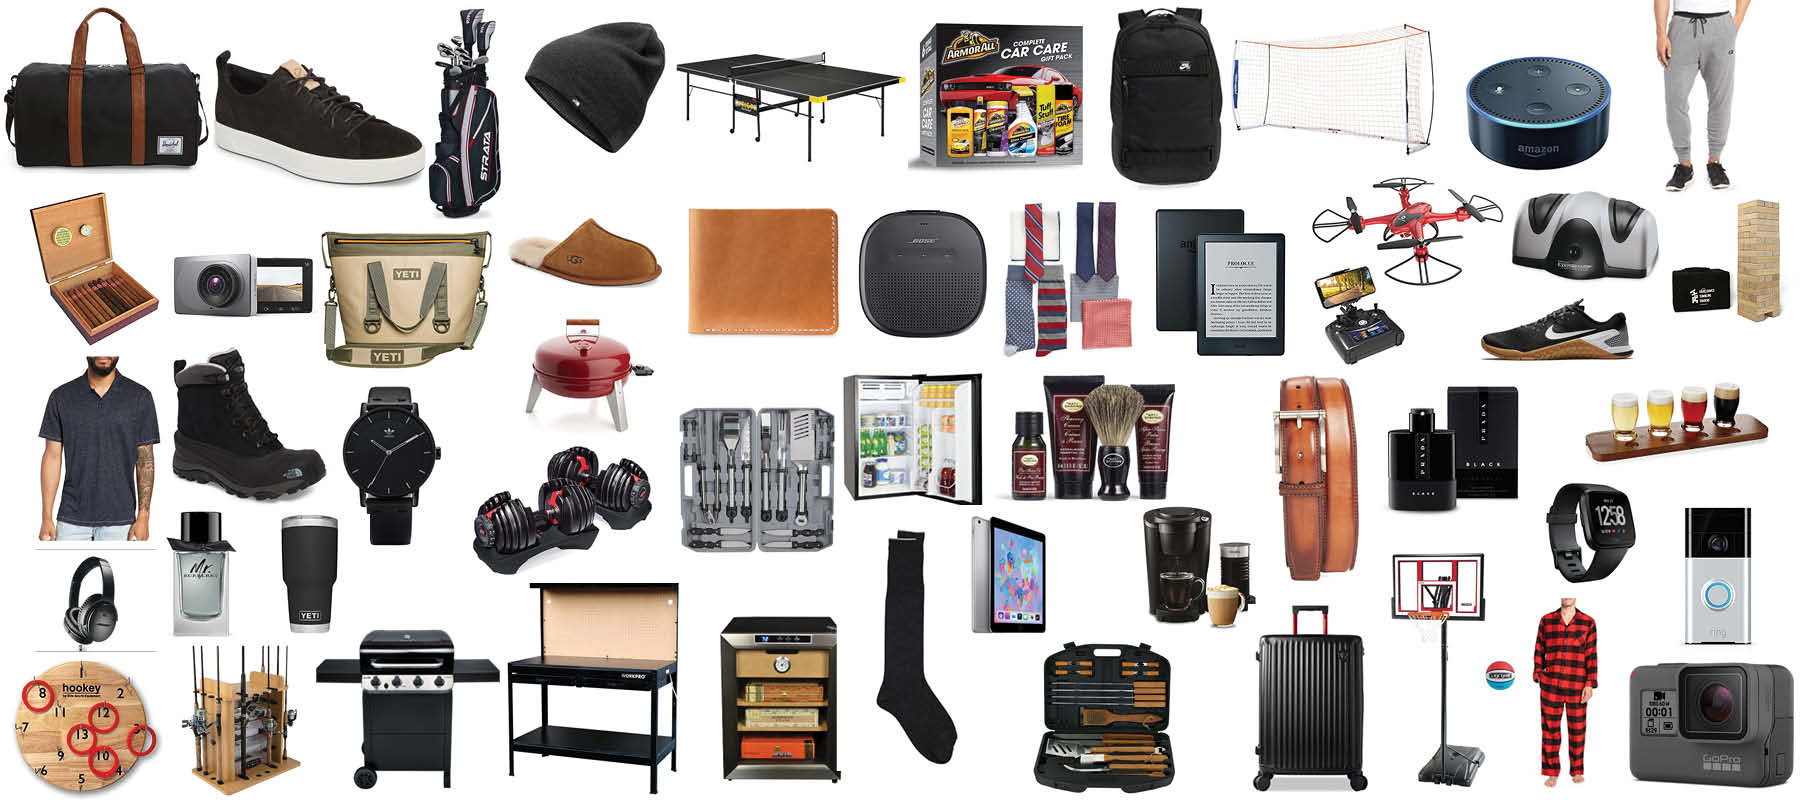 Holiday Gift Ideas For Him
 100 Gift Ideas for Men